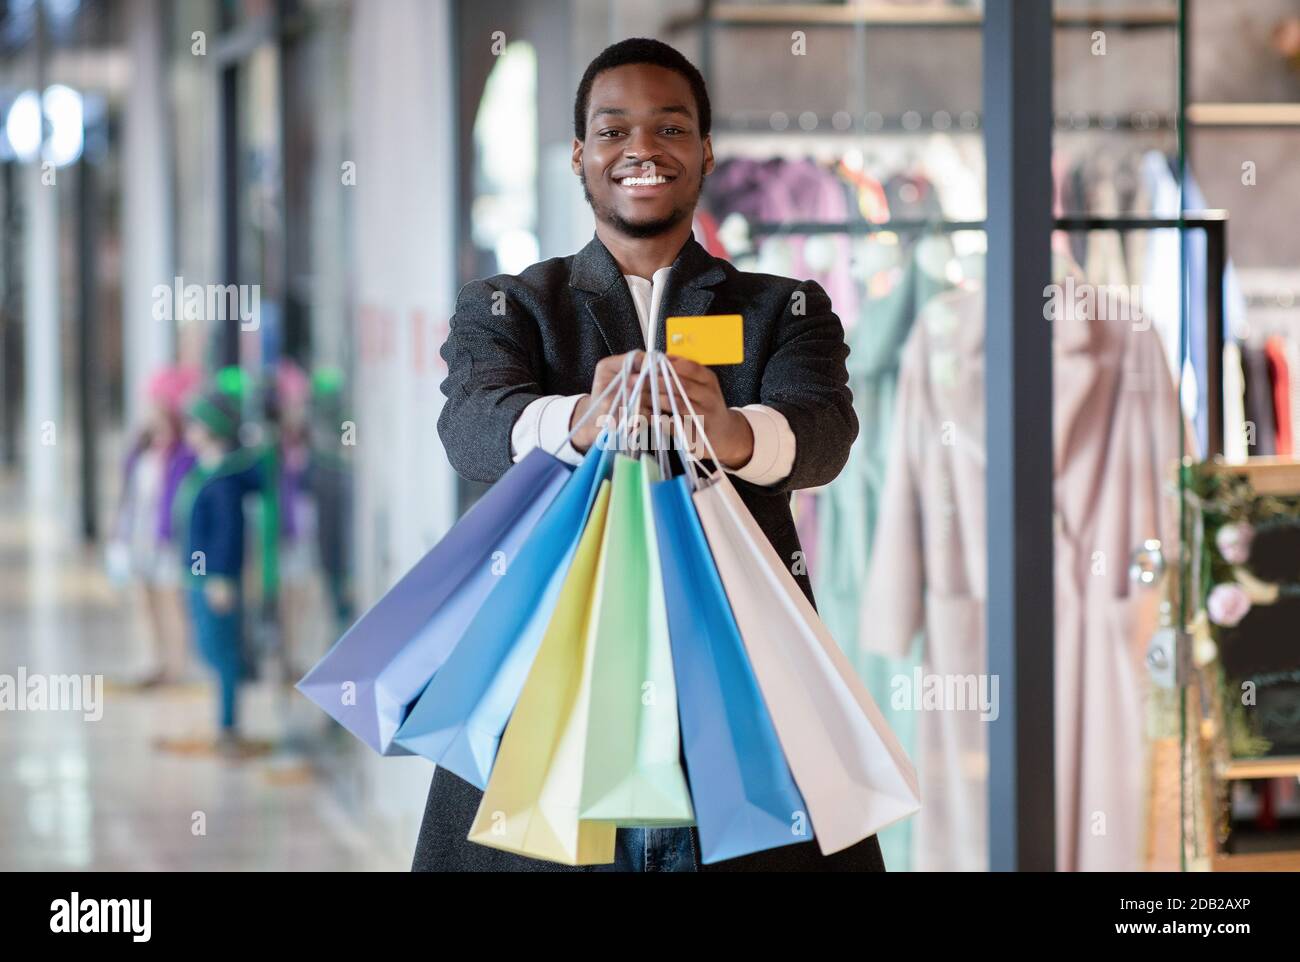 Credit card and a lot of purchases on black friday before holidays Stock Photo